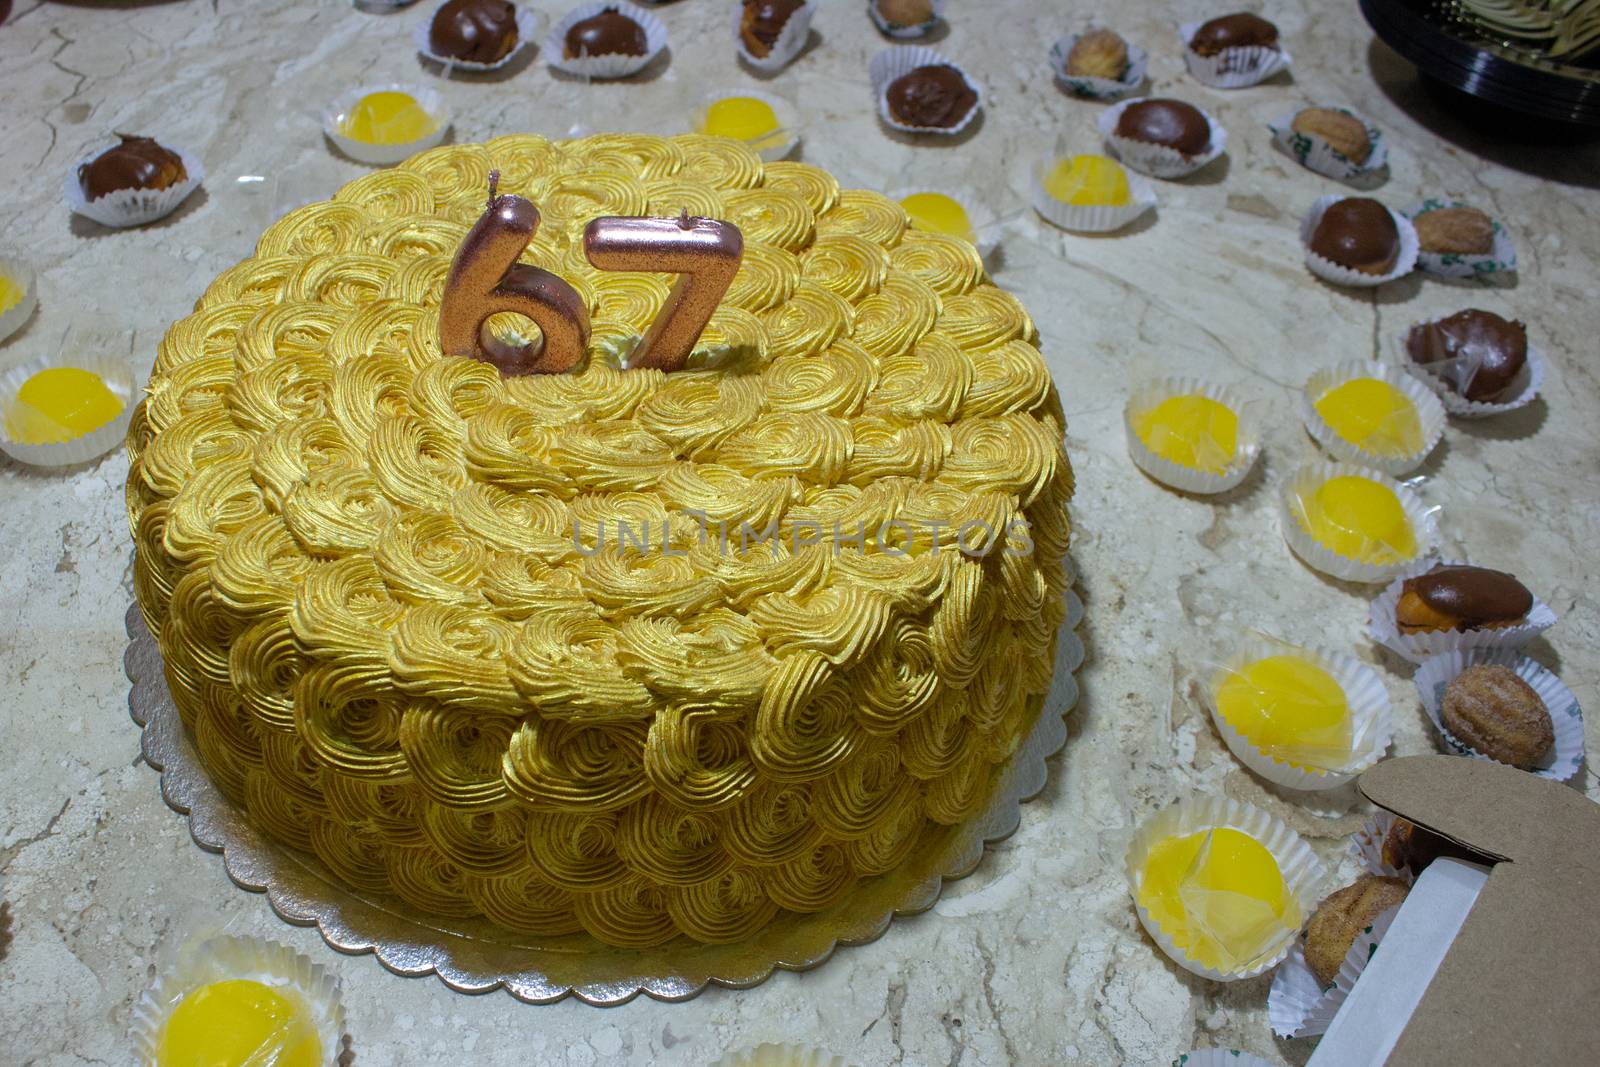 Golden birthday cake covered in chantilly surrounded by sweeties